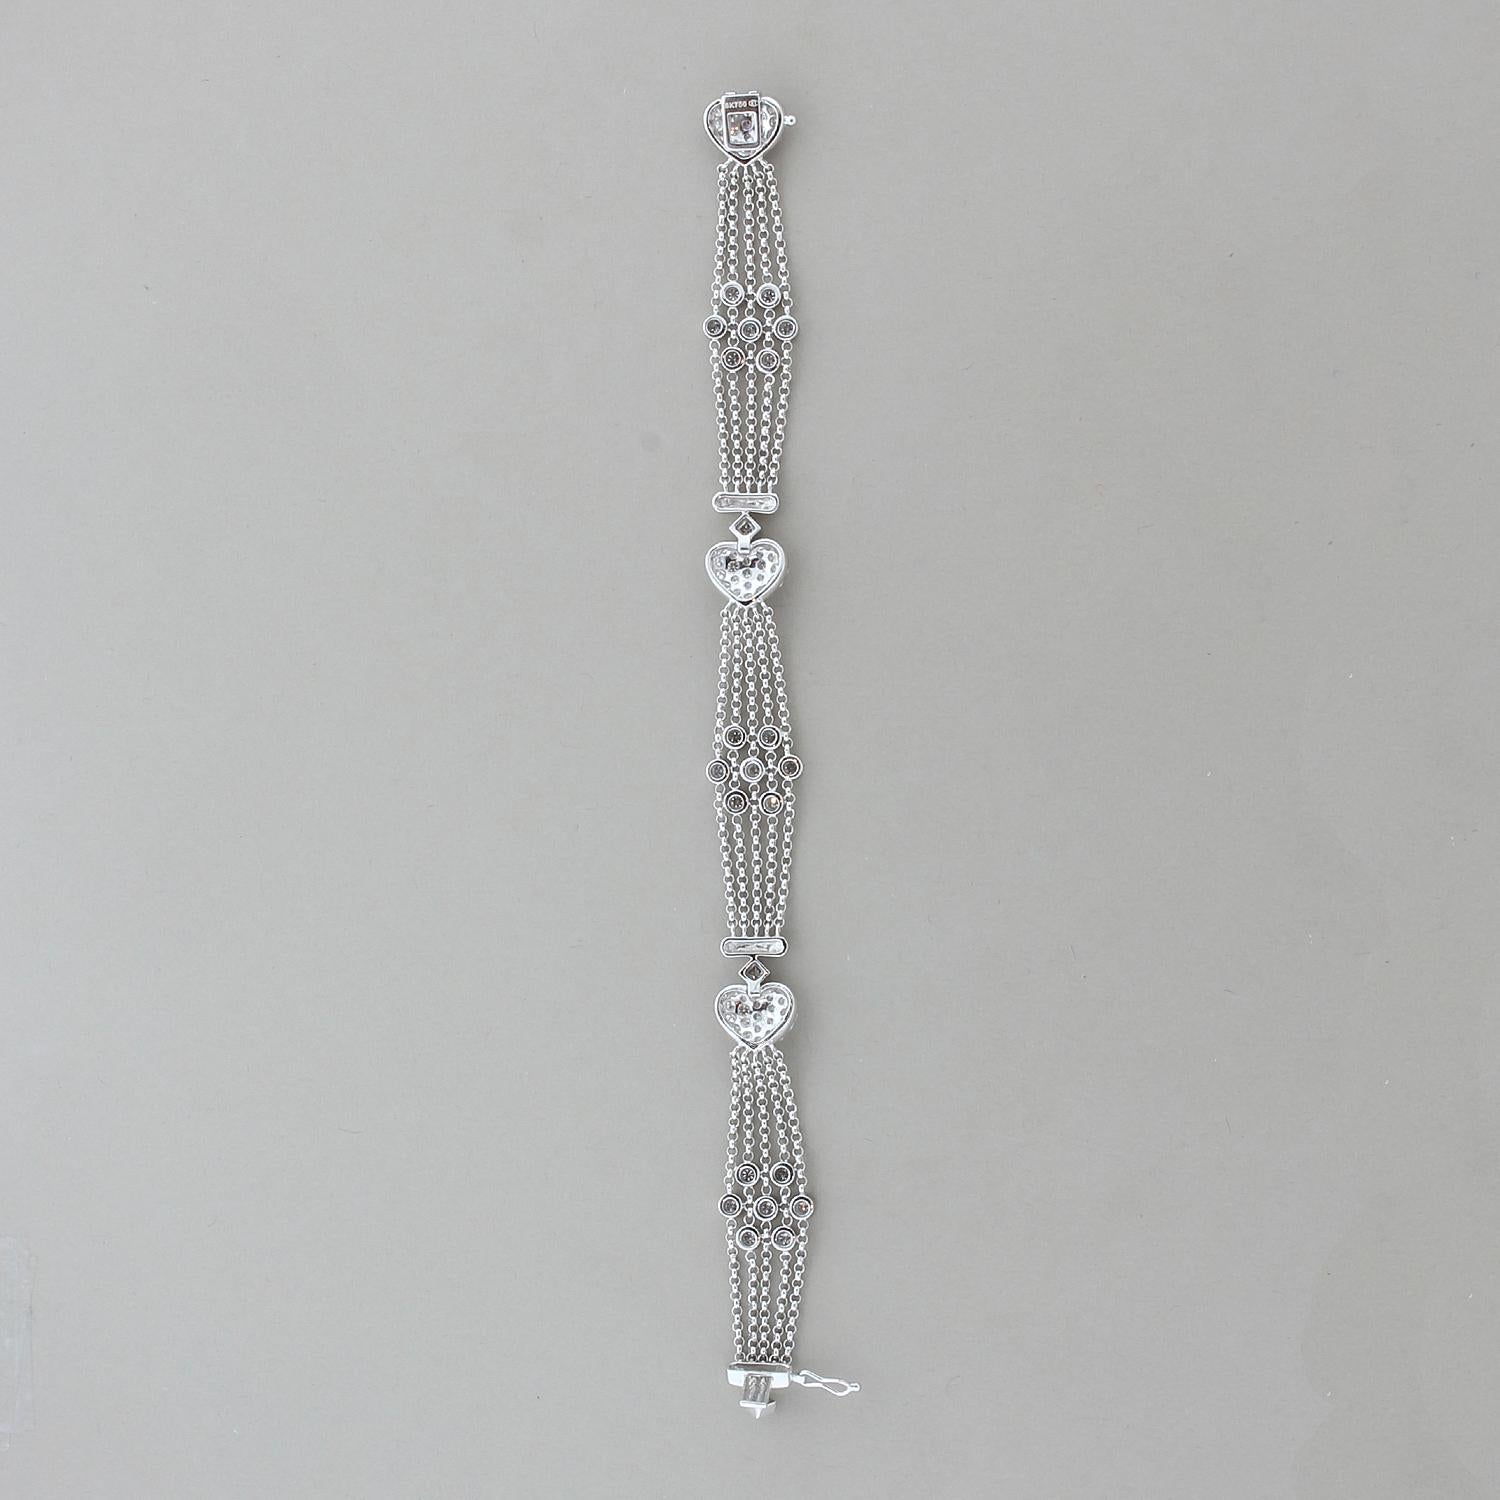 This meticulously crafted bracelet features 2.84 carats of diamonds set in an 18K white gold mesh setting. The round cut diamonds are pave set in heart shapes alternating five gold strands expertly strung to create floral clusters of bezel set